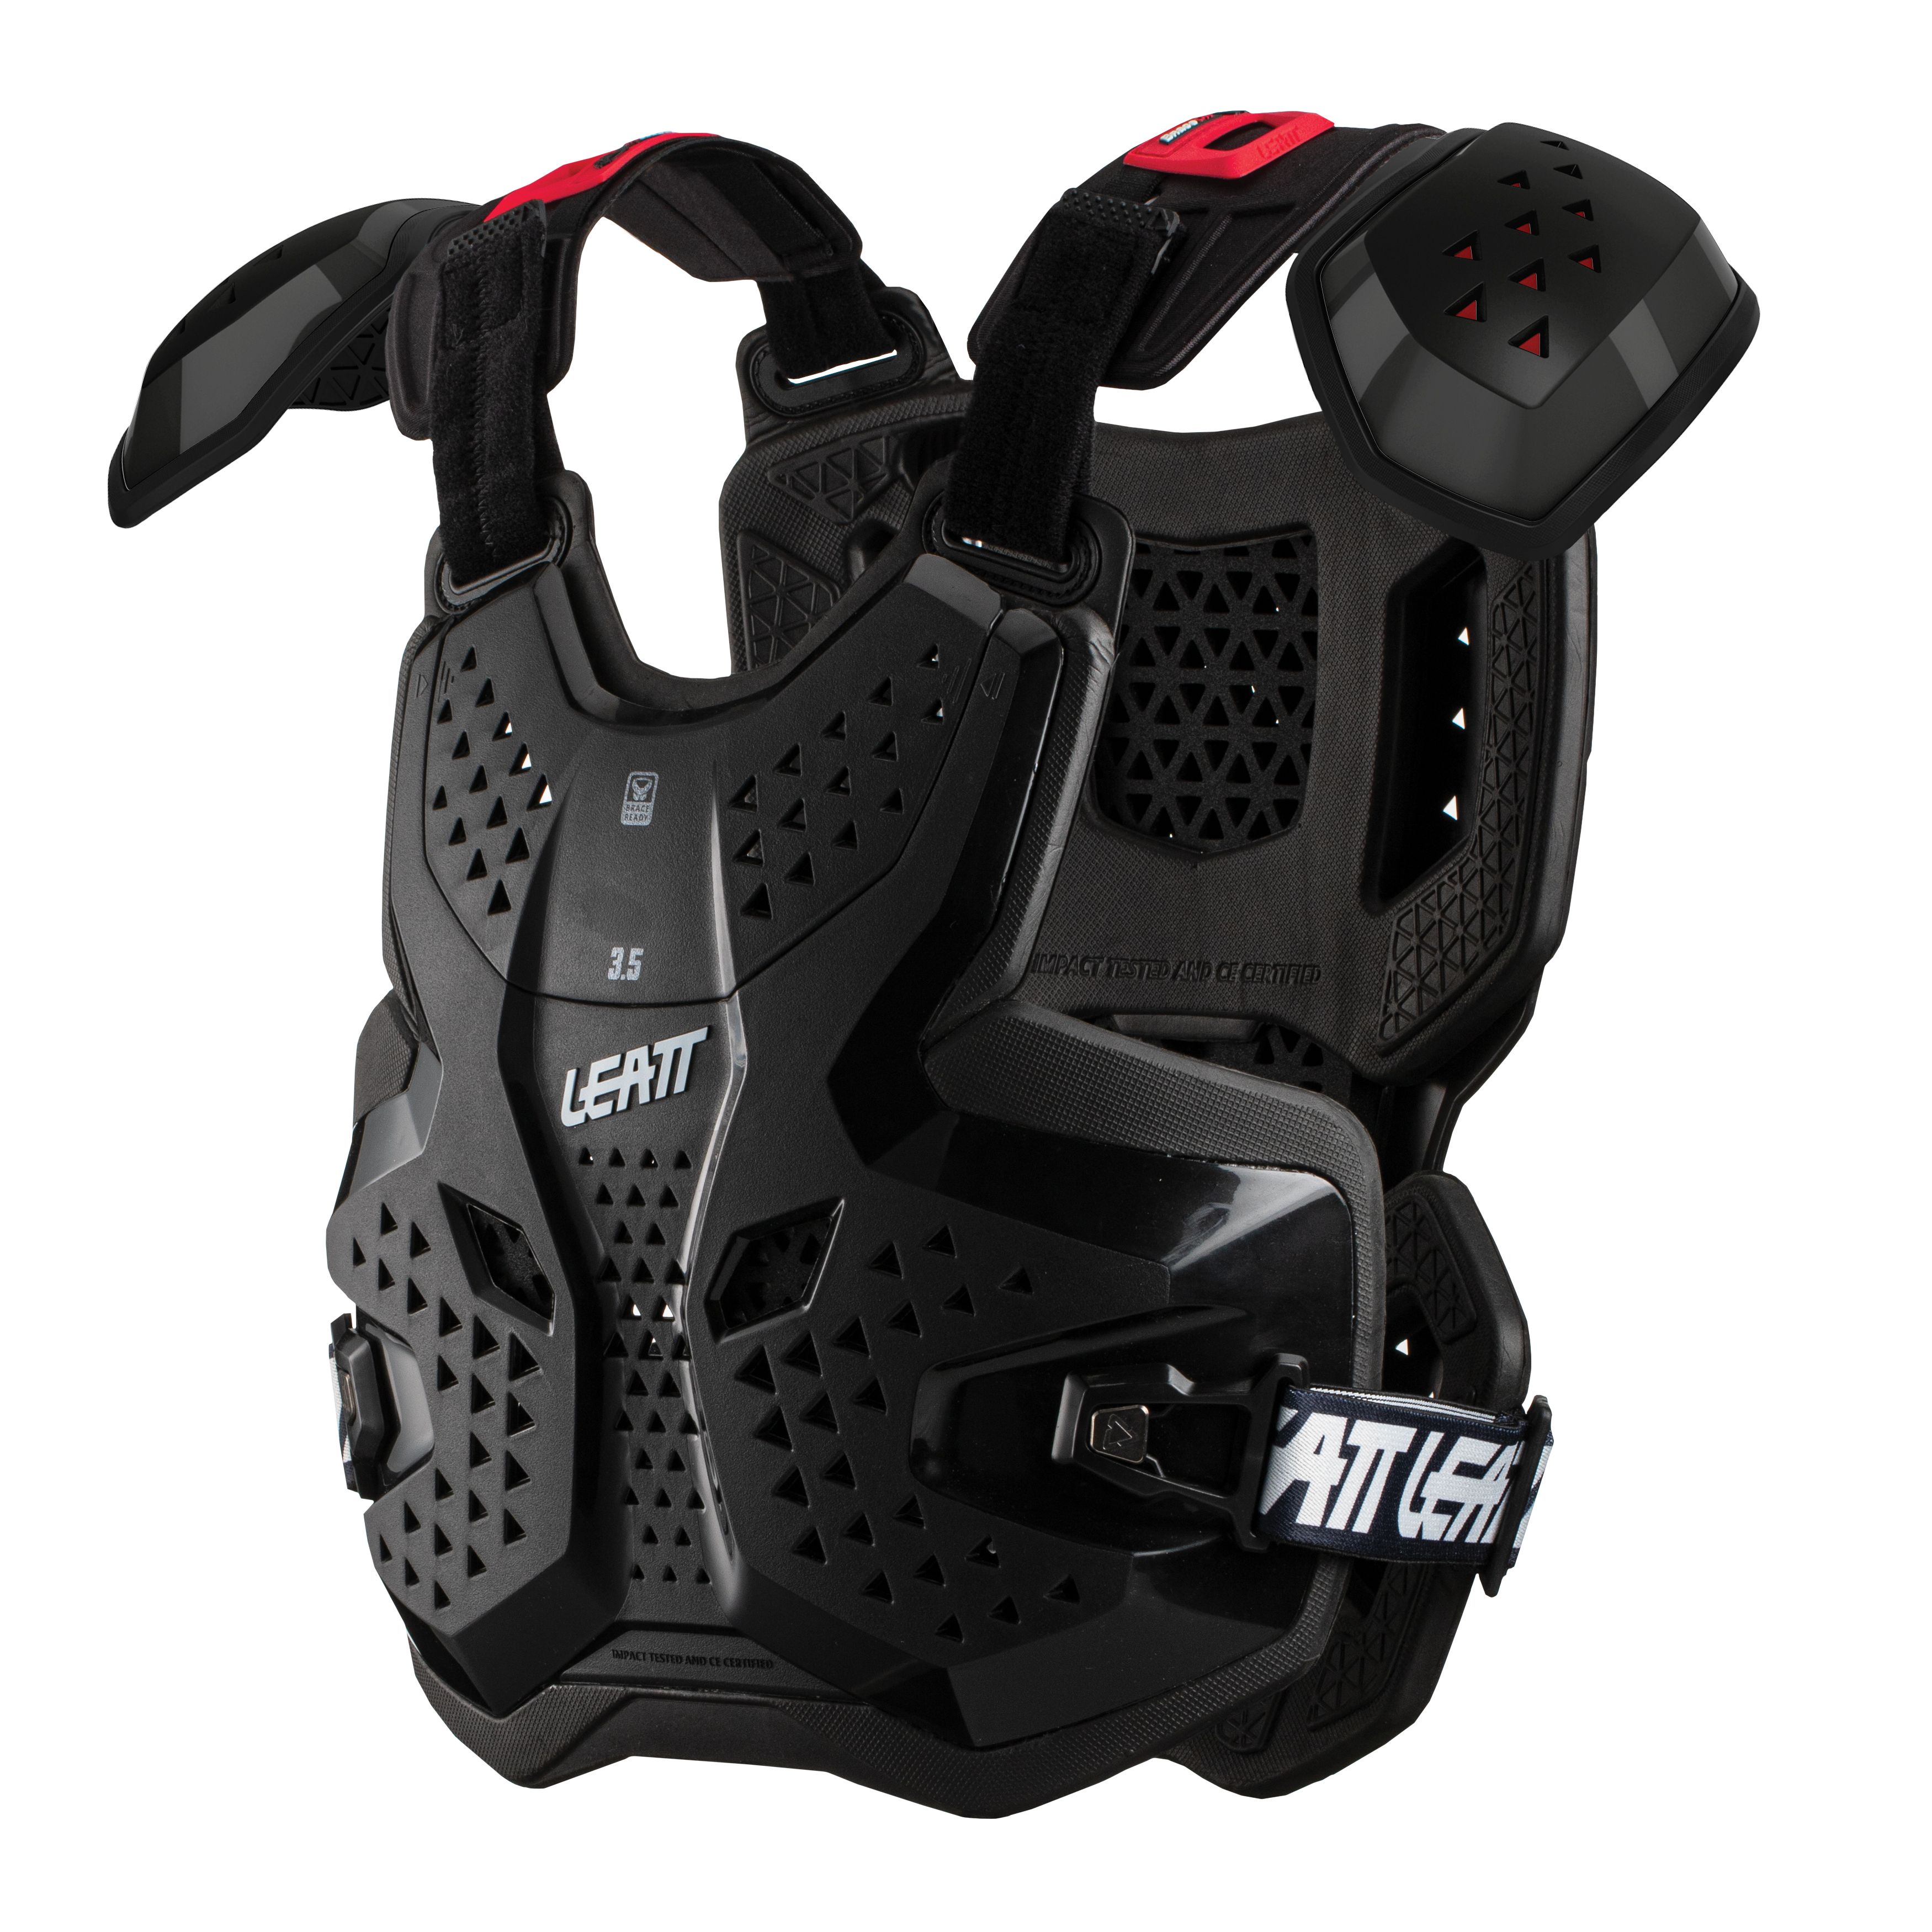 Viewing Images For Leatt 3.5 Pro Chest Protector :: MotorcycleGear.com